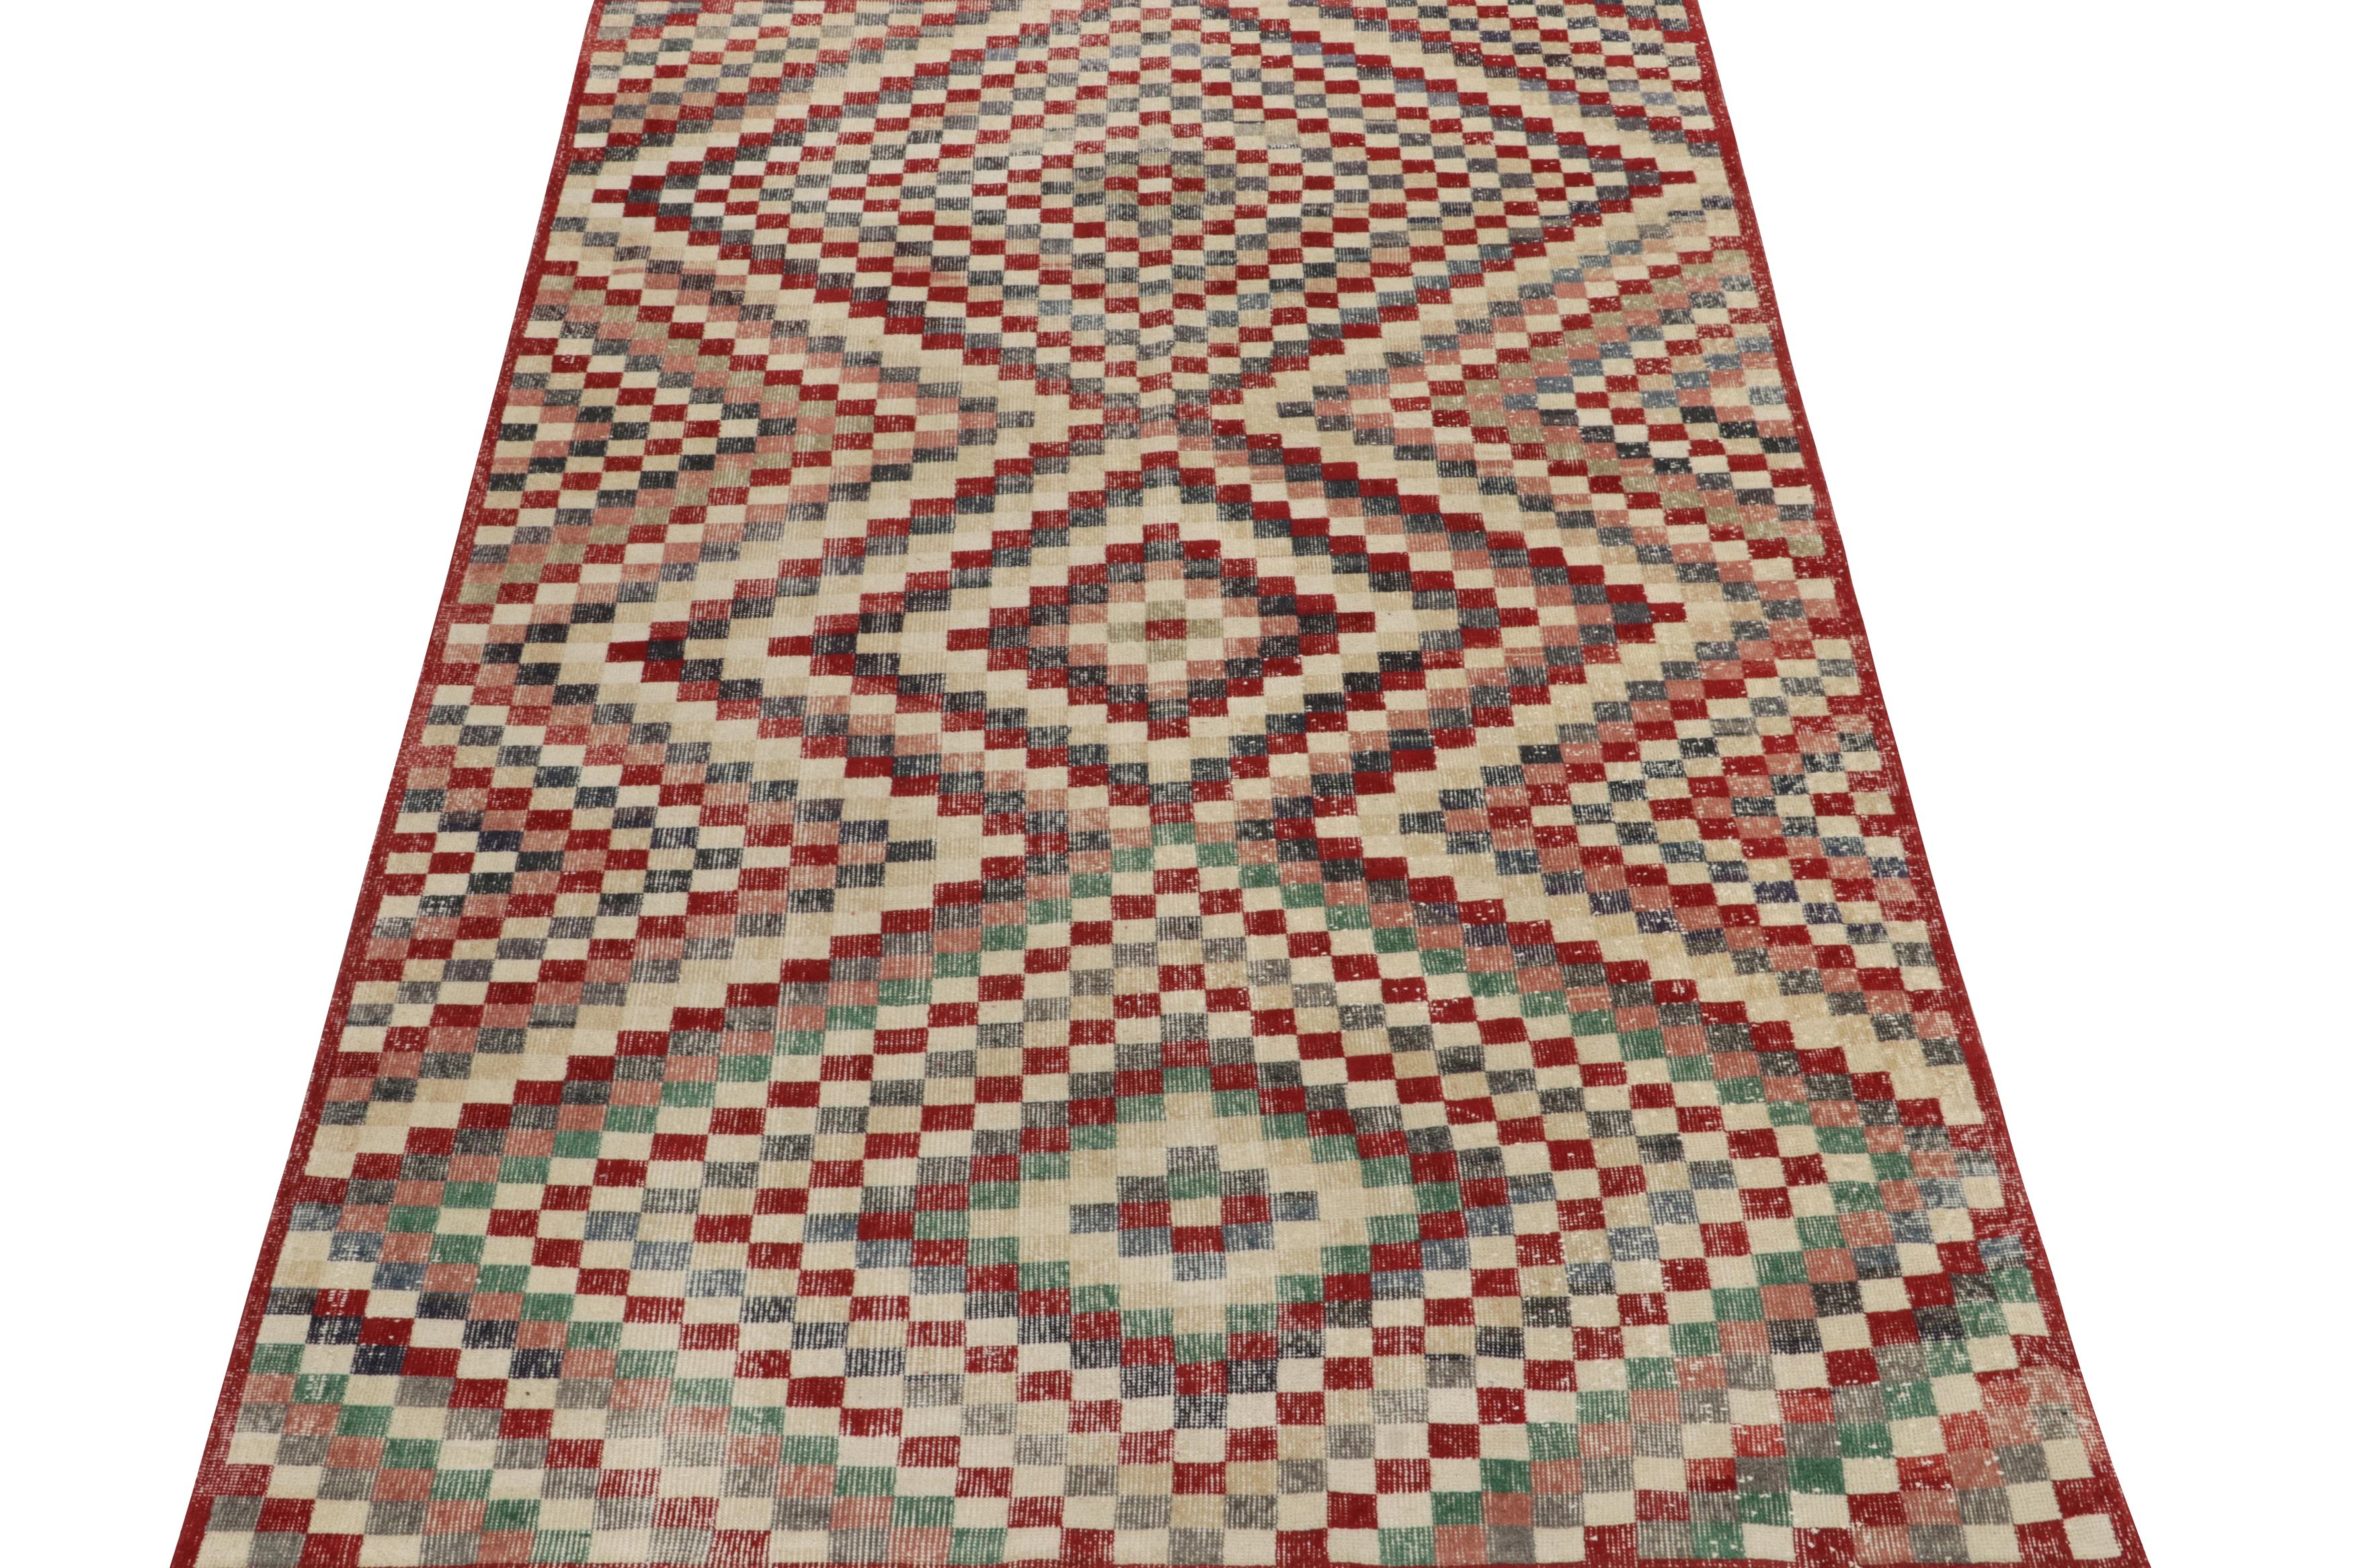 Folk Art 1960s Vintage Turkish Rug in Red, Beige and Pink Geometric Pattern, Distressed For Sale